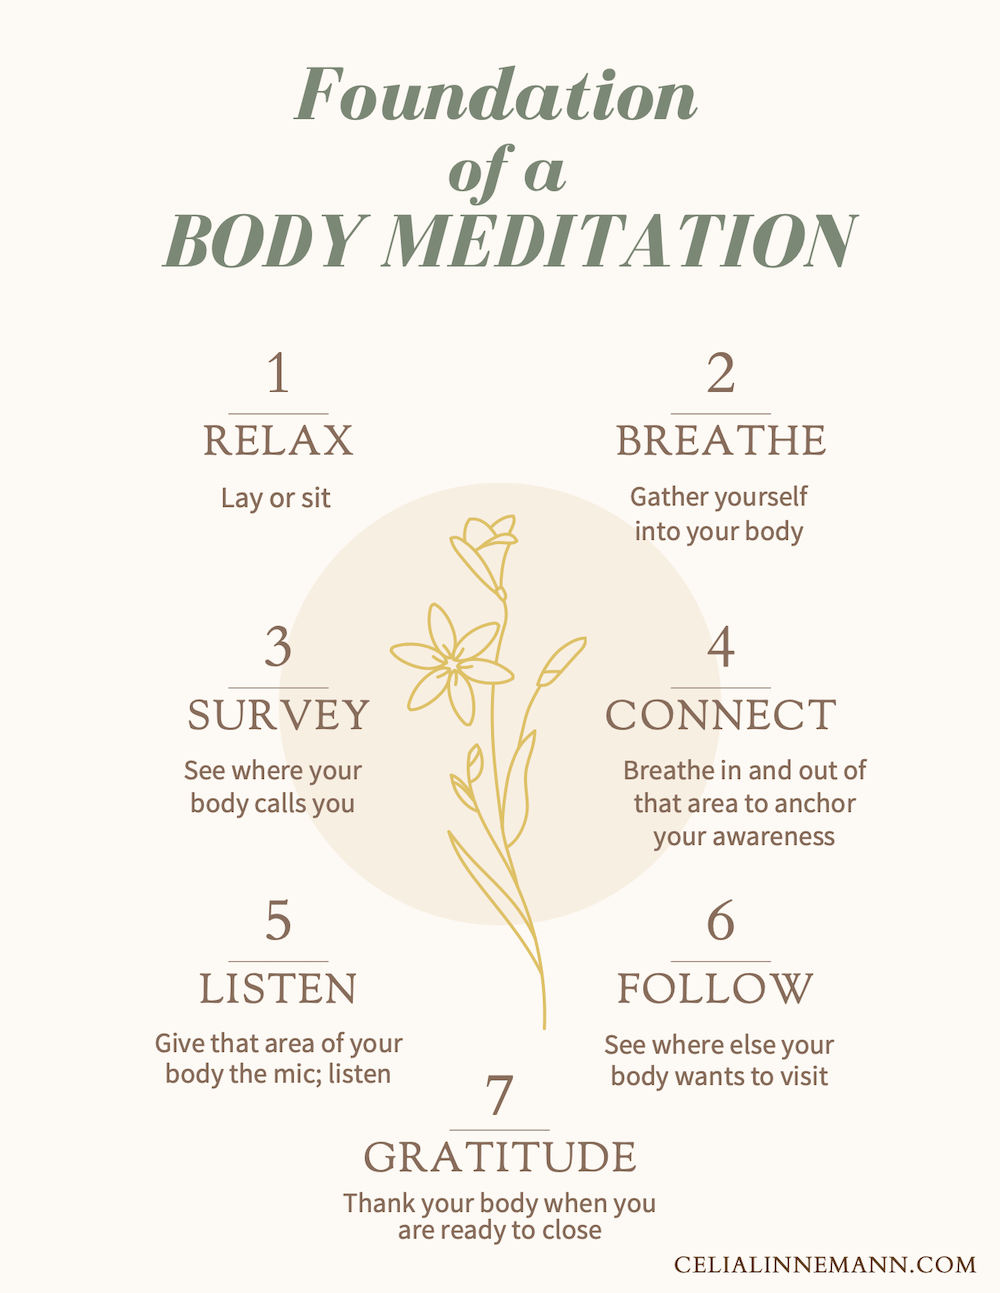 Body Meditations made simple: The foundations of an Embodiment Practice